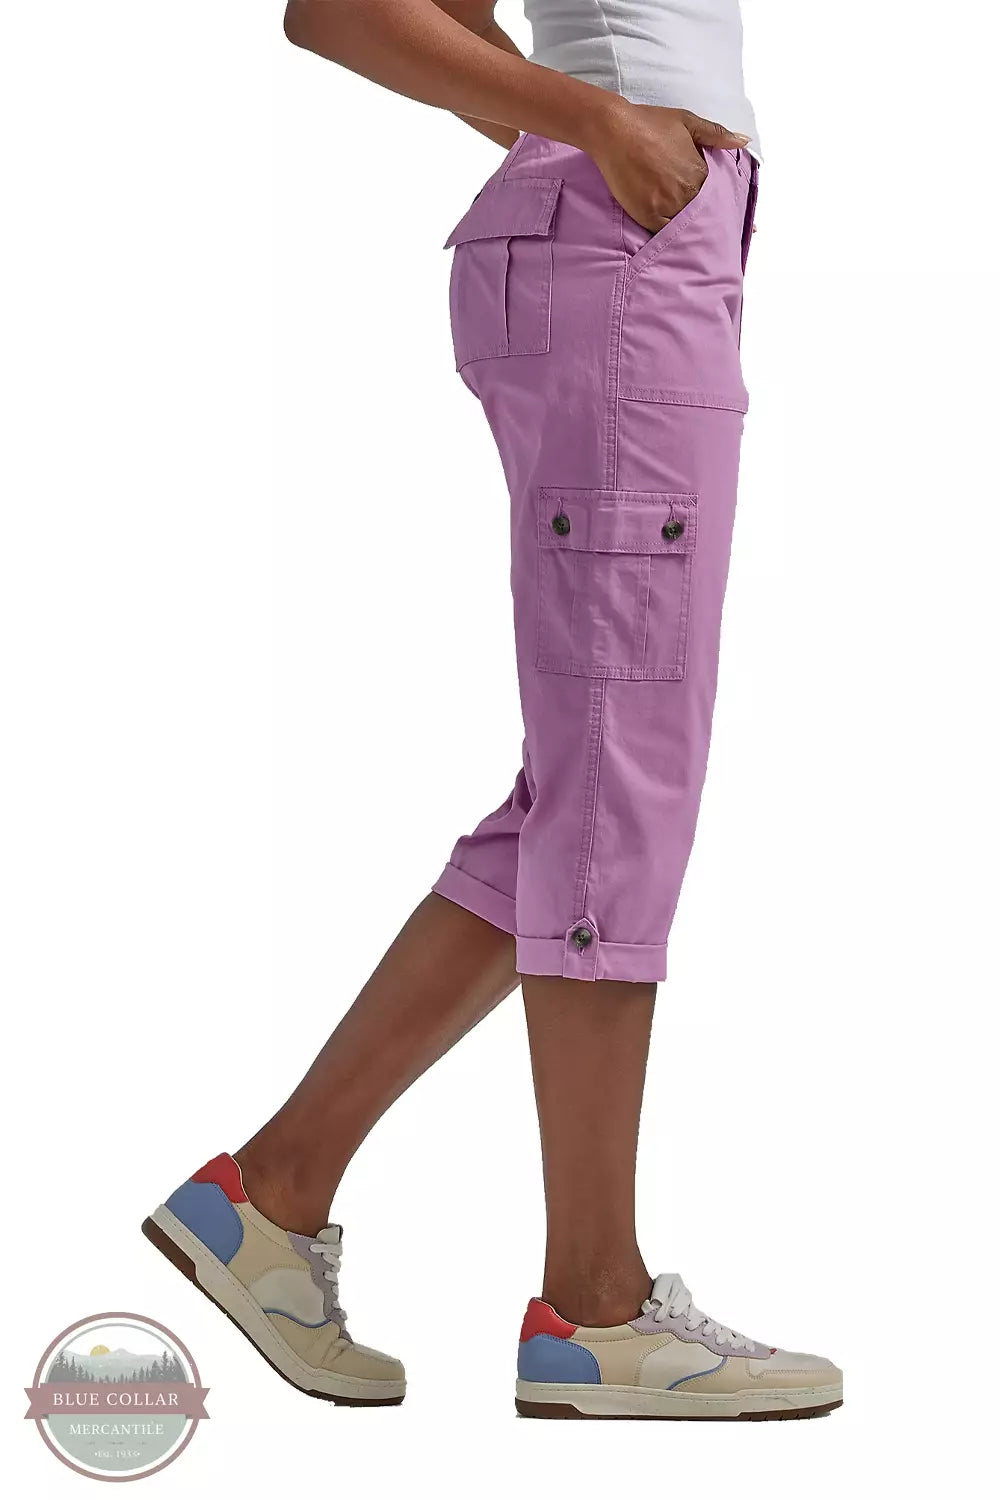 Lee 112328967 Flex-To-Go Relaxed Fit Cargo Capris in Pansy Side View